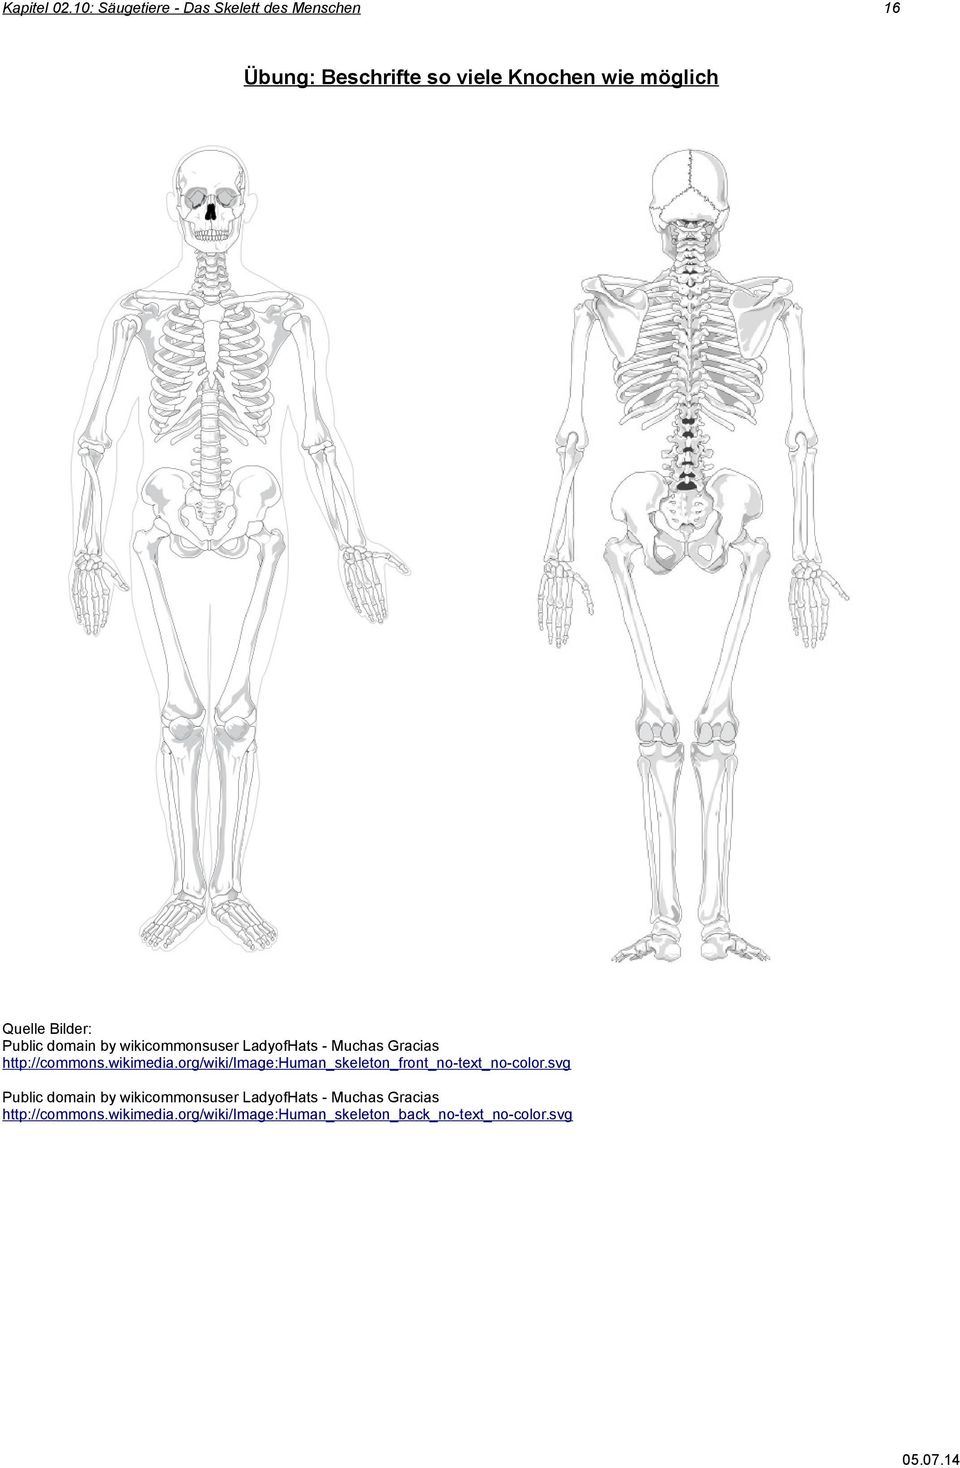 org/wiki/image:human_skeleton_front_no-text_no-color.